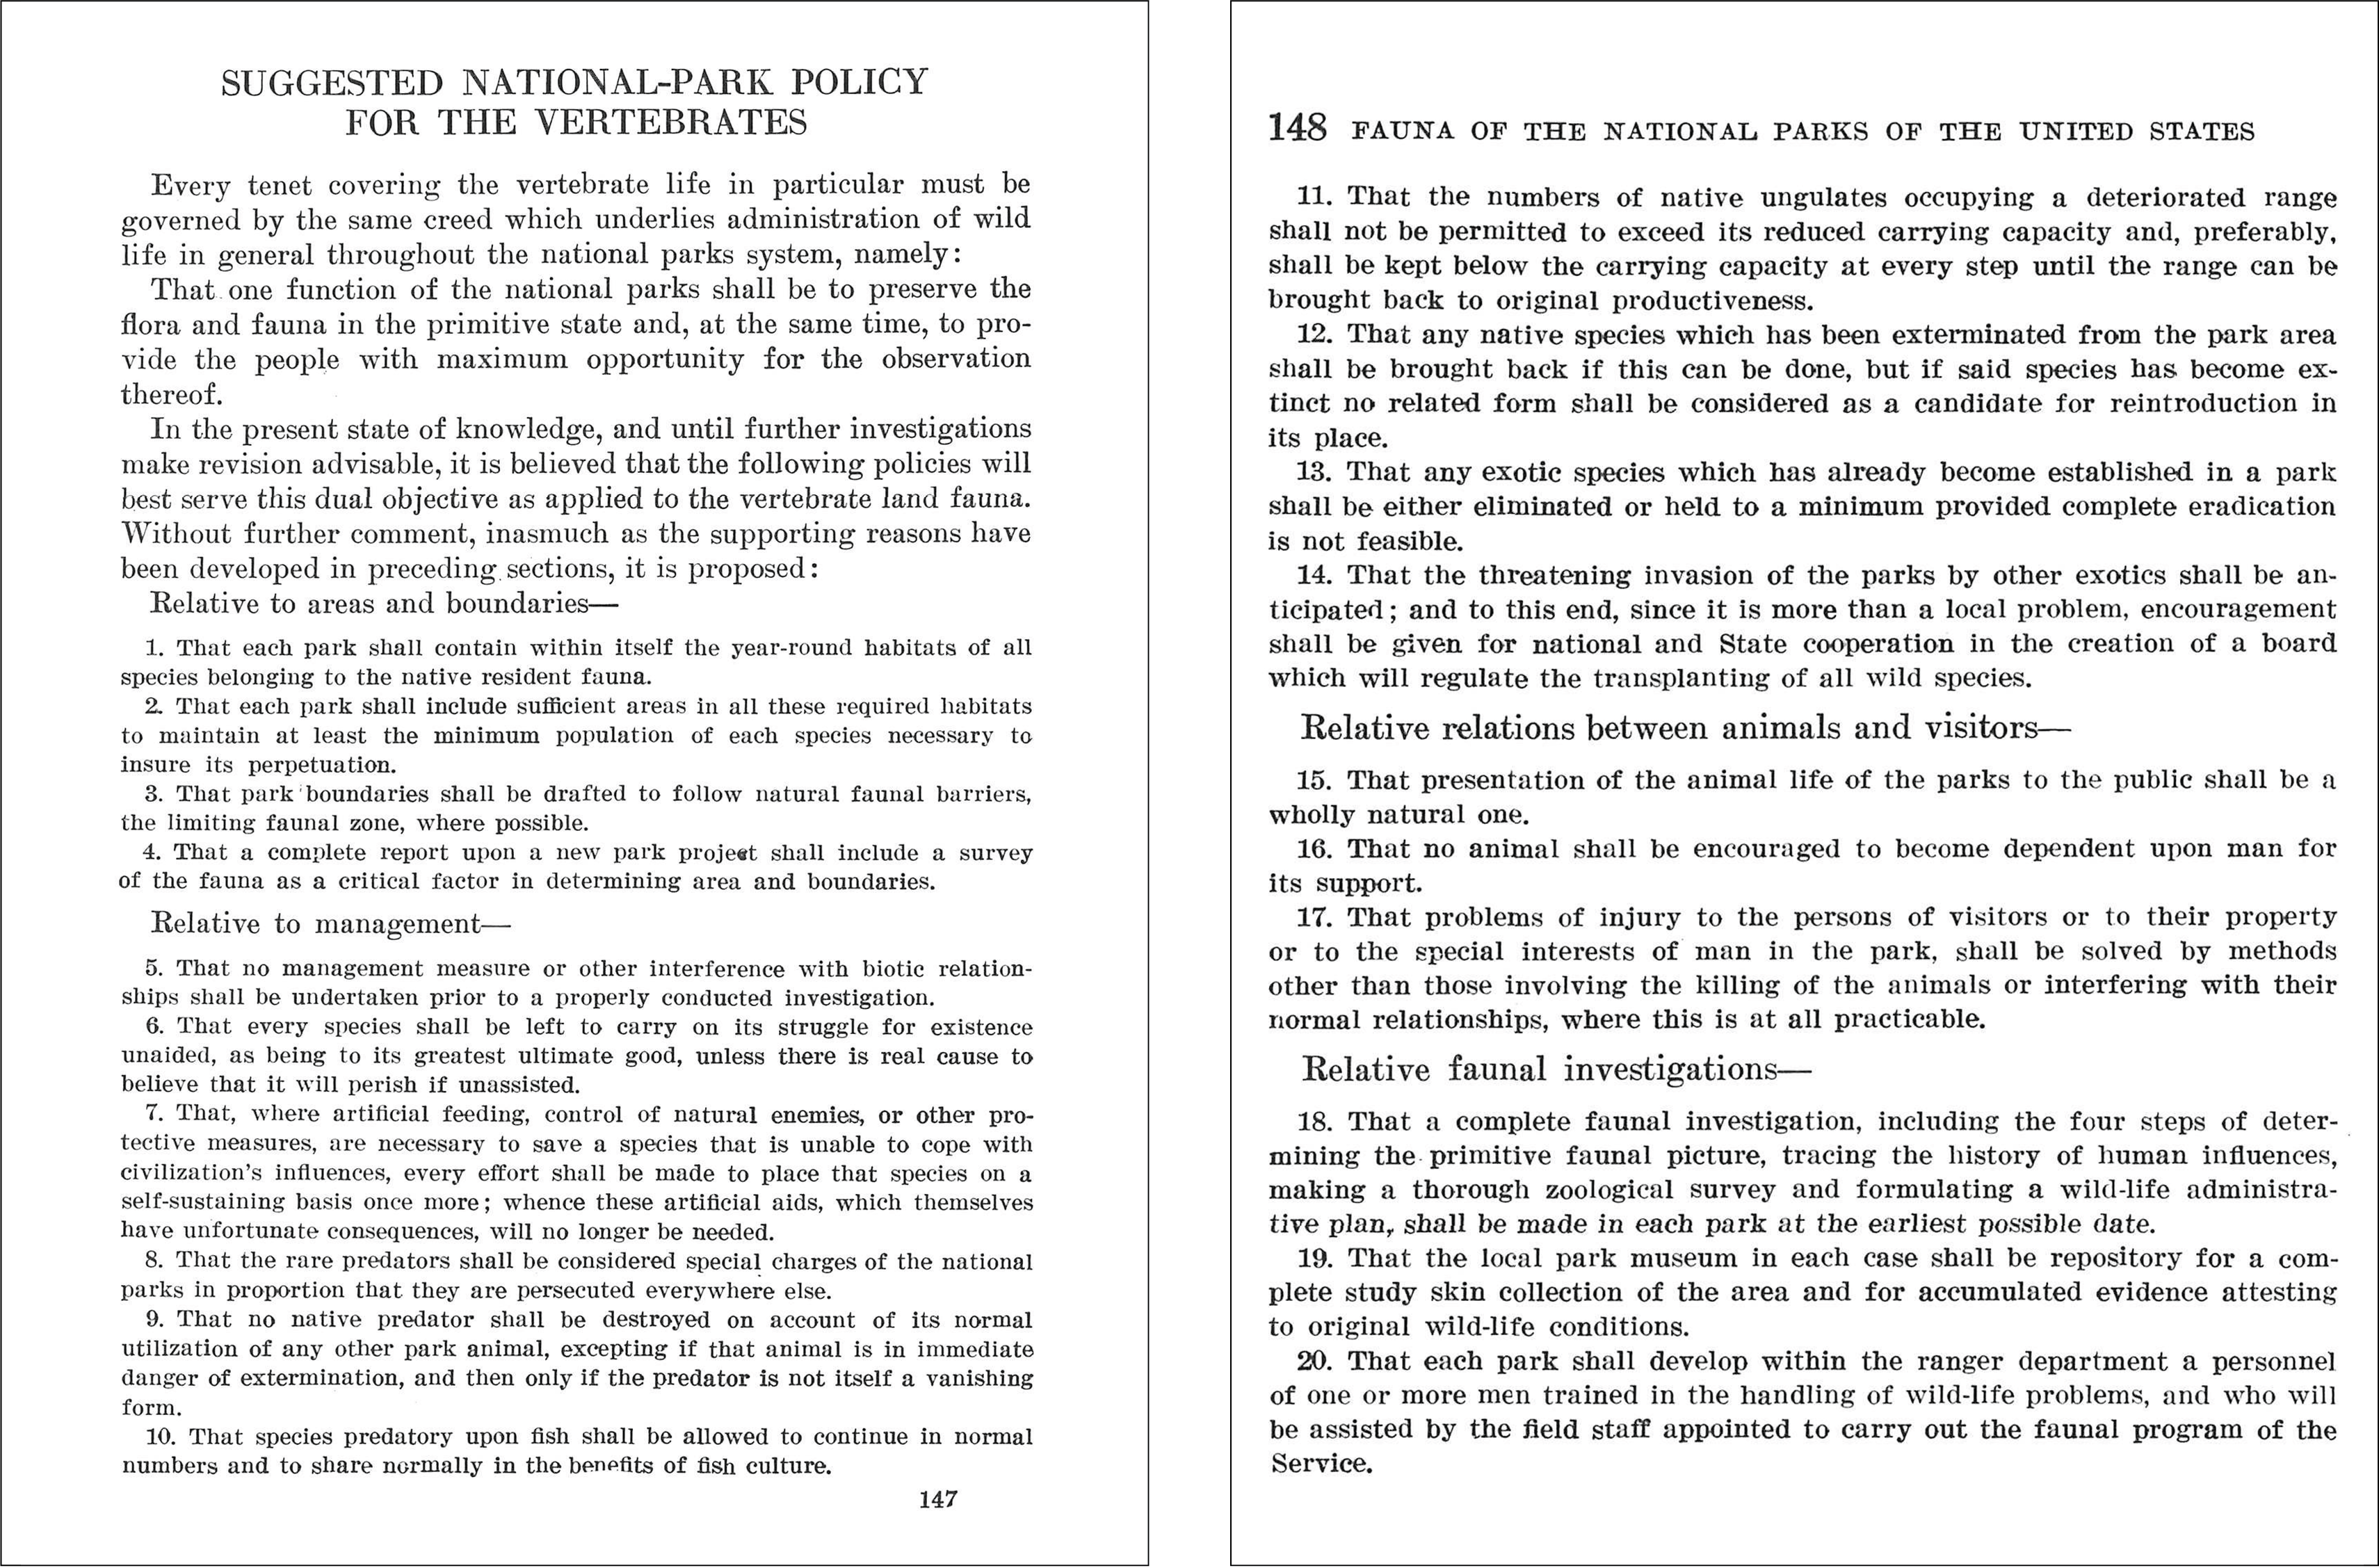 Pages 147 and 148 of Fauna No. 1, with the heading, “Suggested National-Park Policy for the Vertebrates.